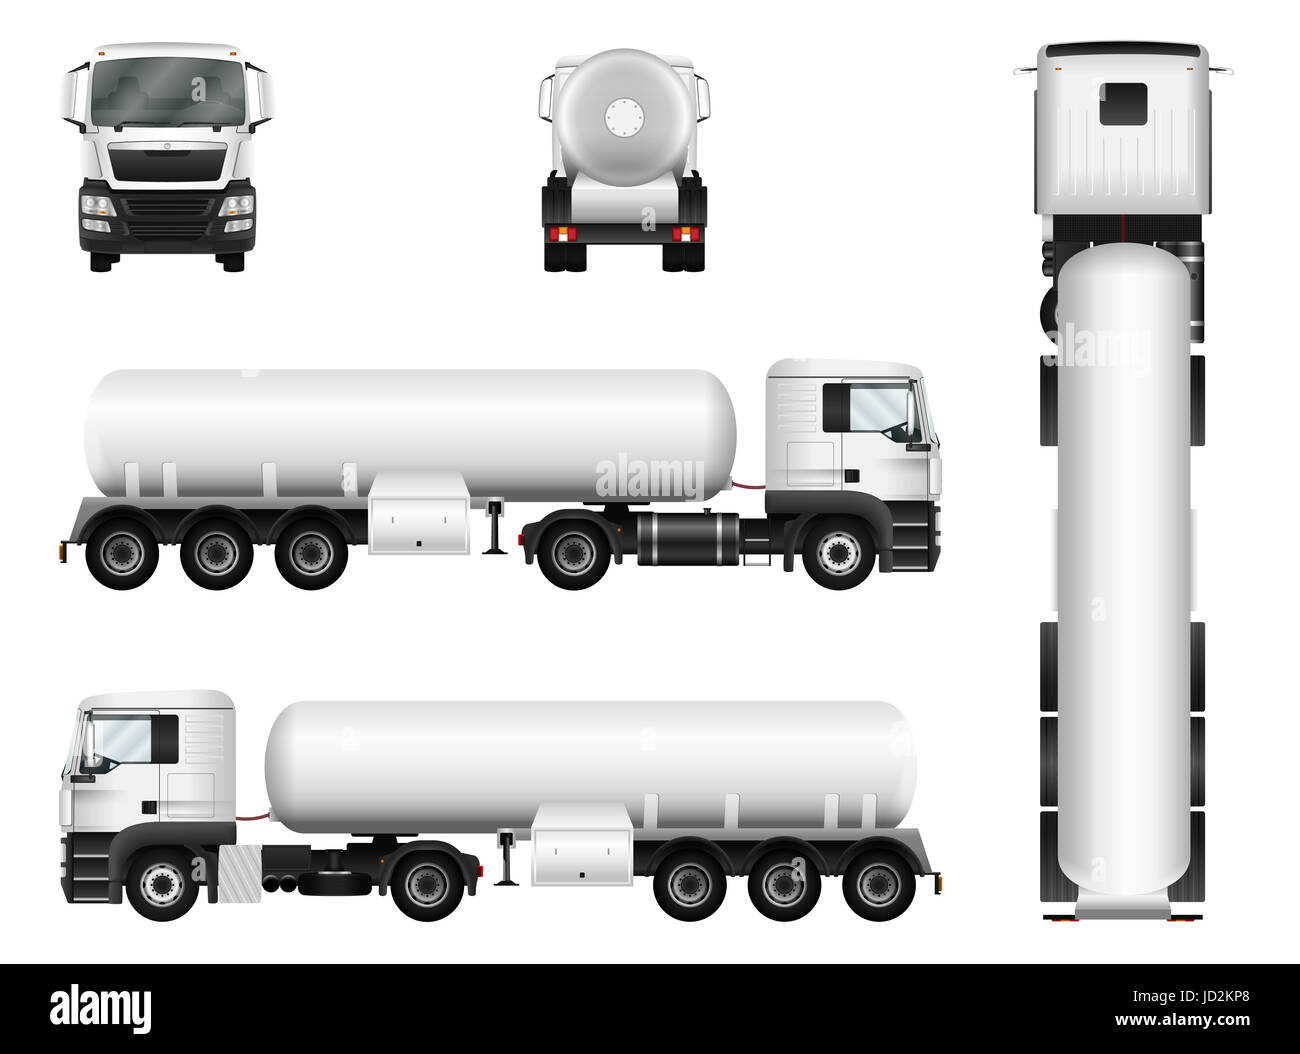 White truck whith trailer. Isolated tank car on white background. Stock Photo